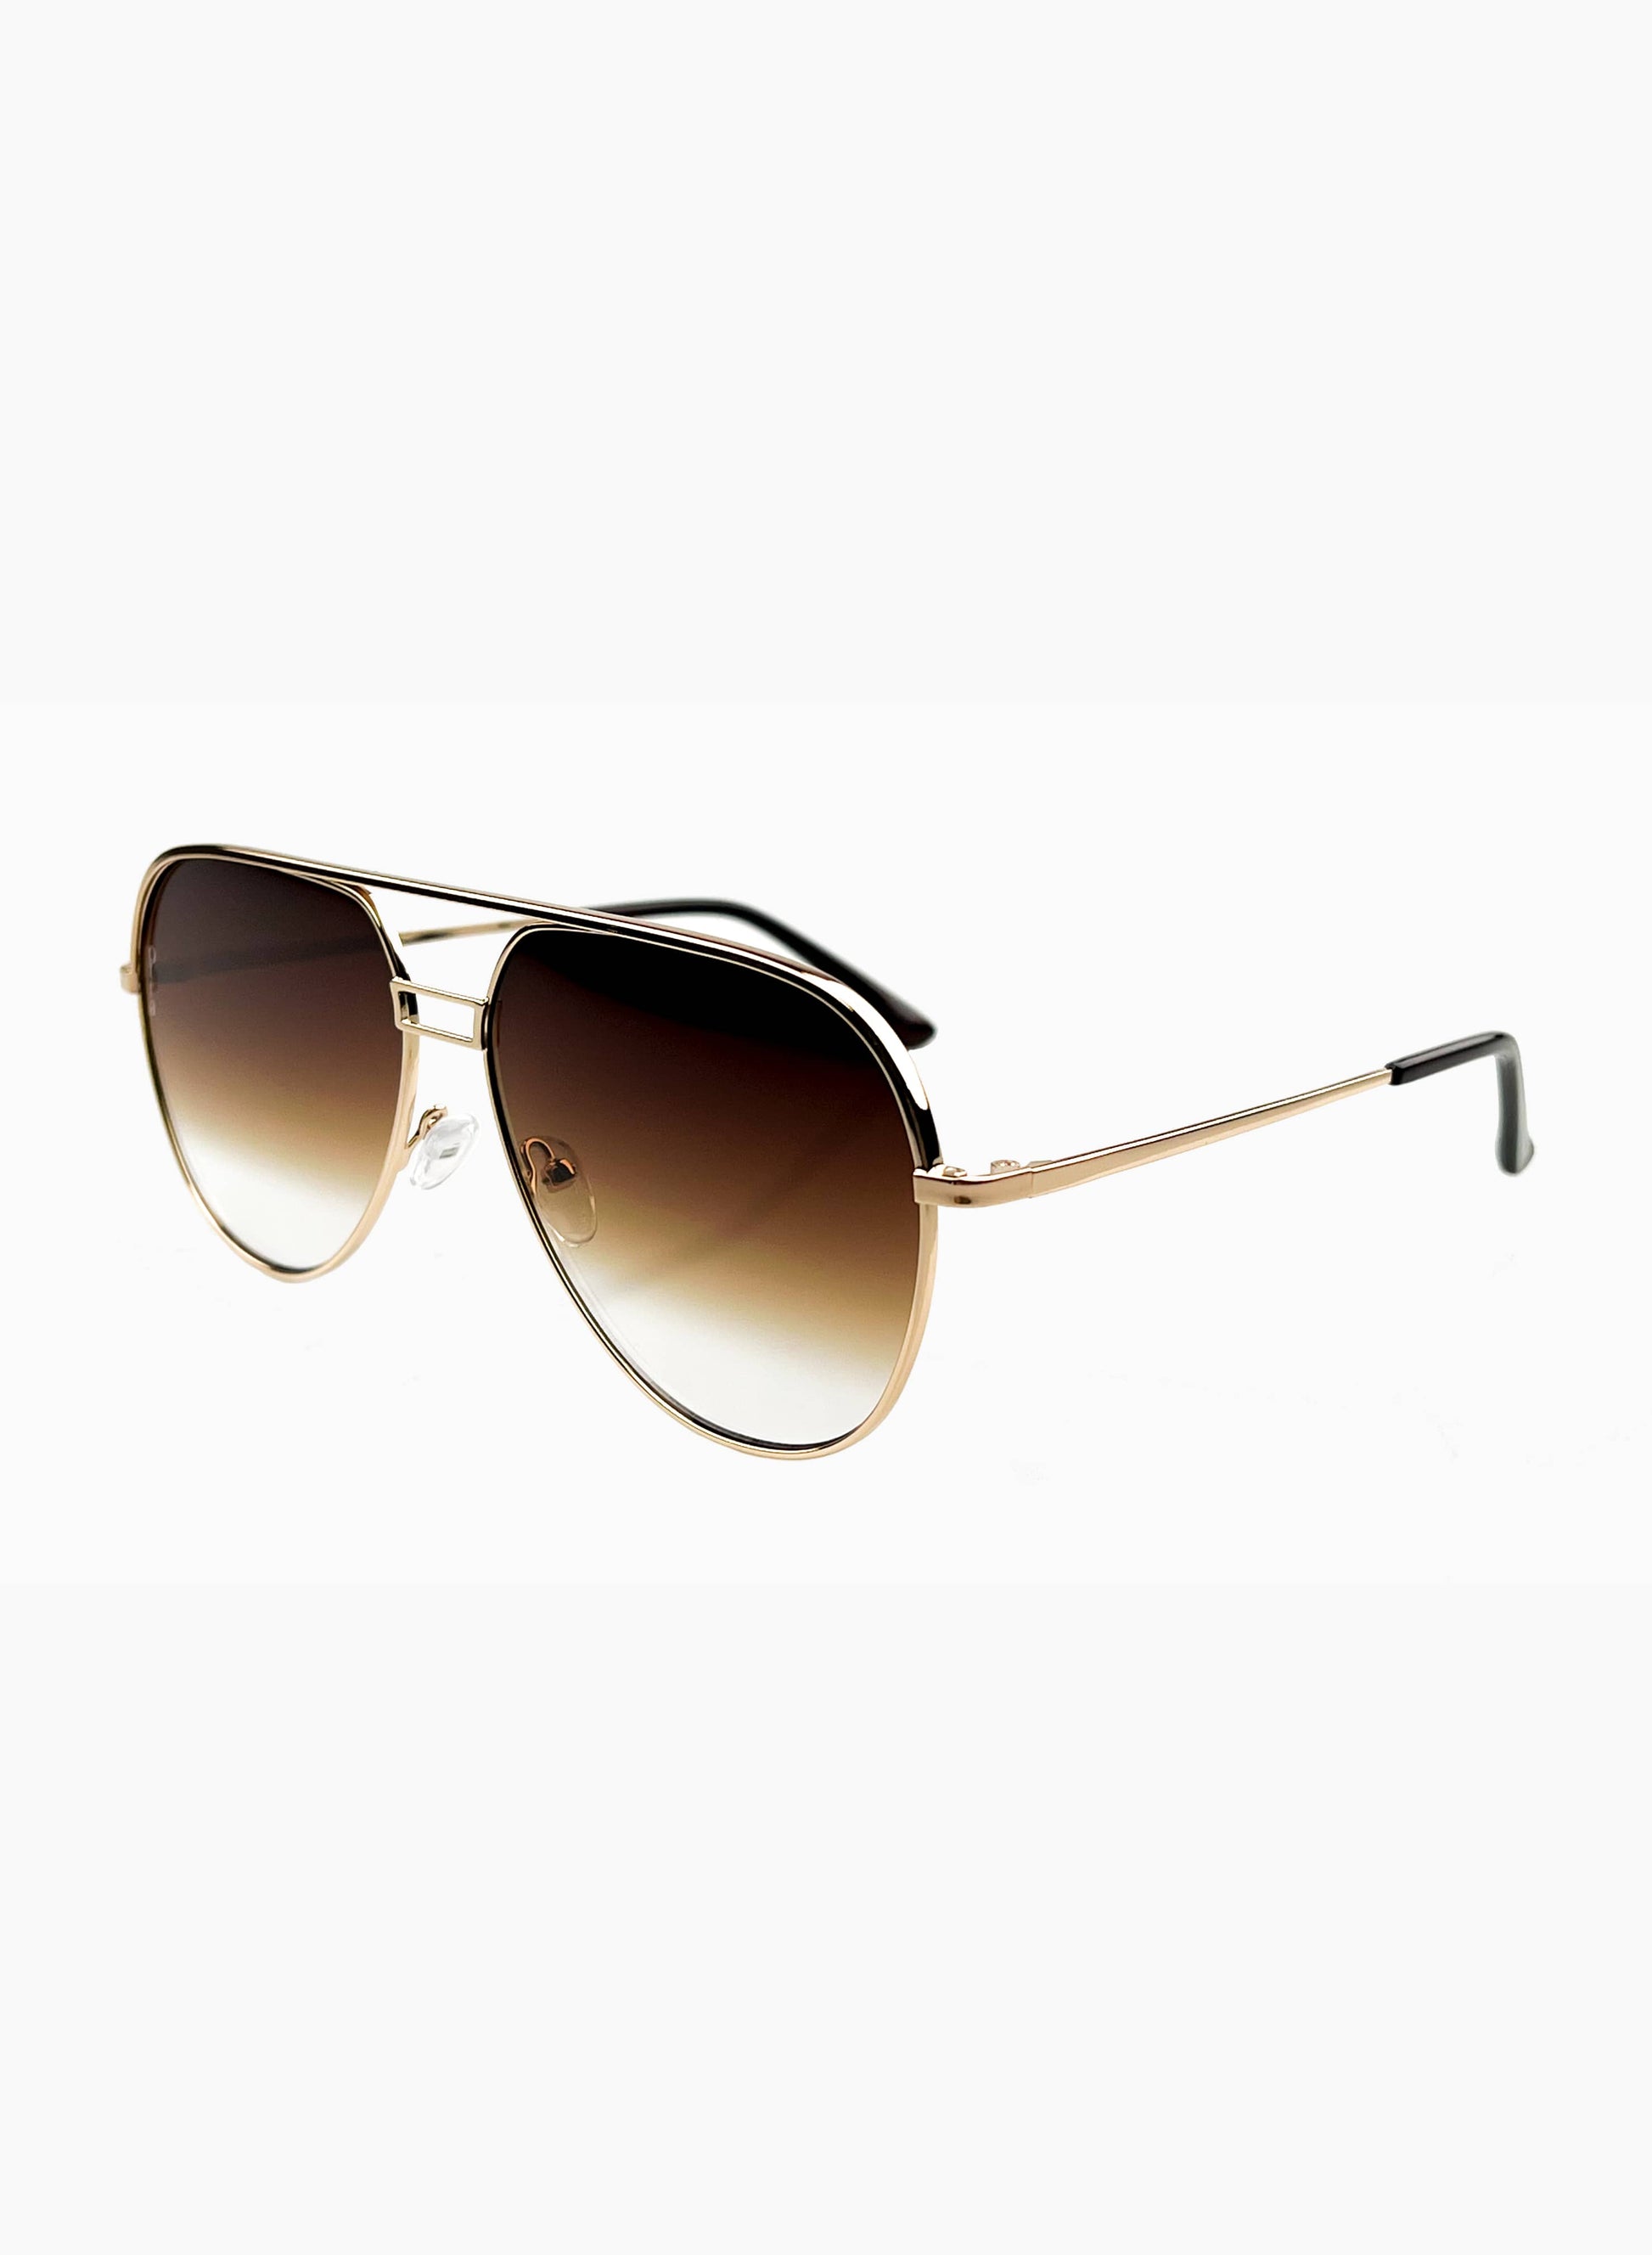 Side view of Transit aviator sunglasses in brown